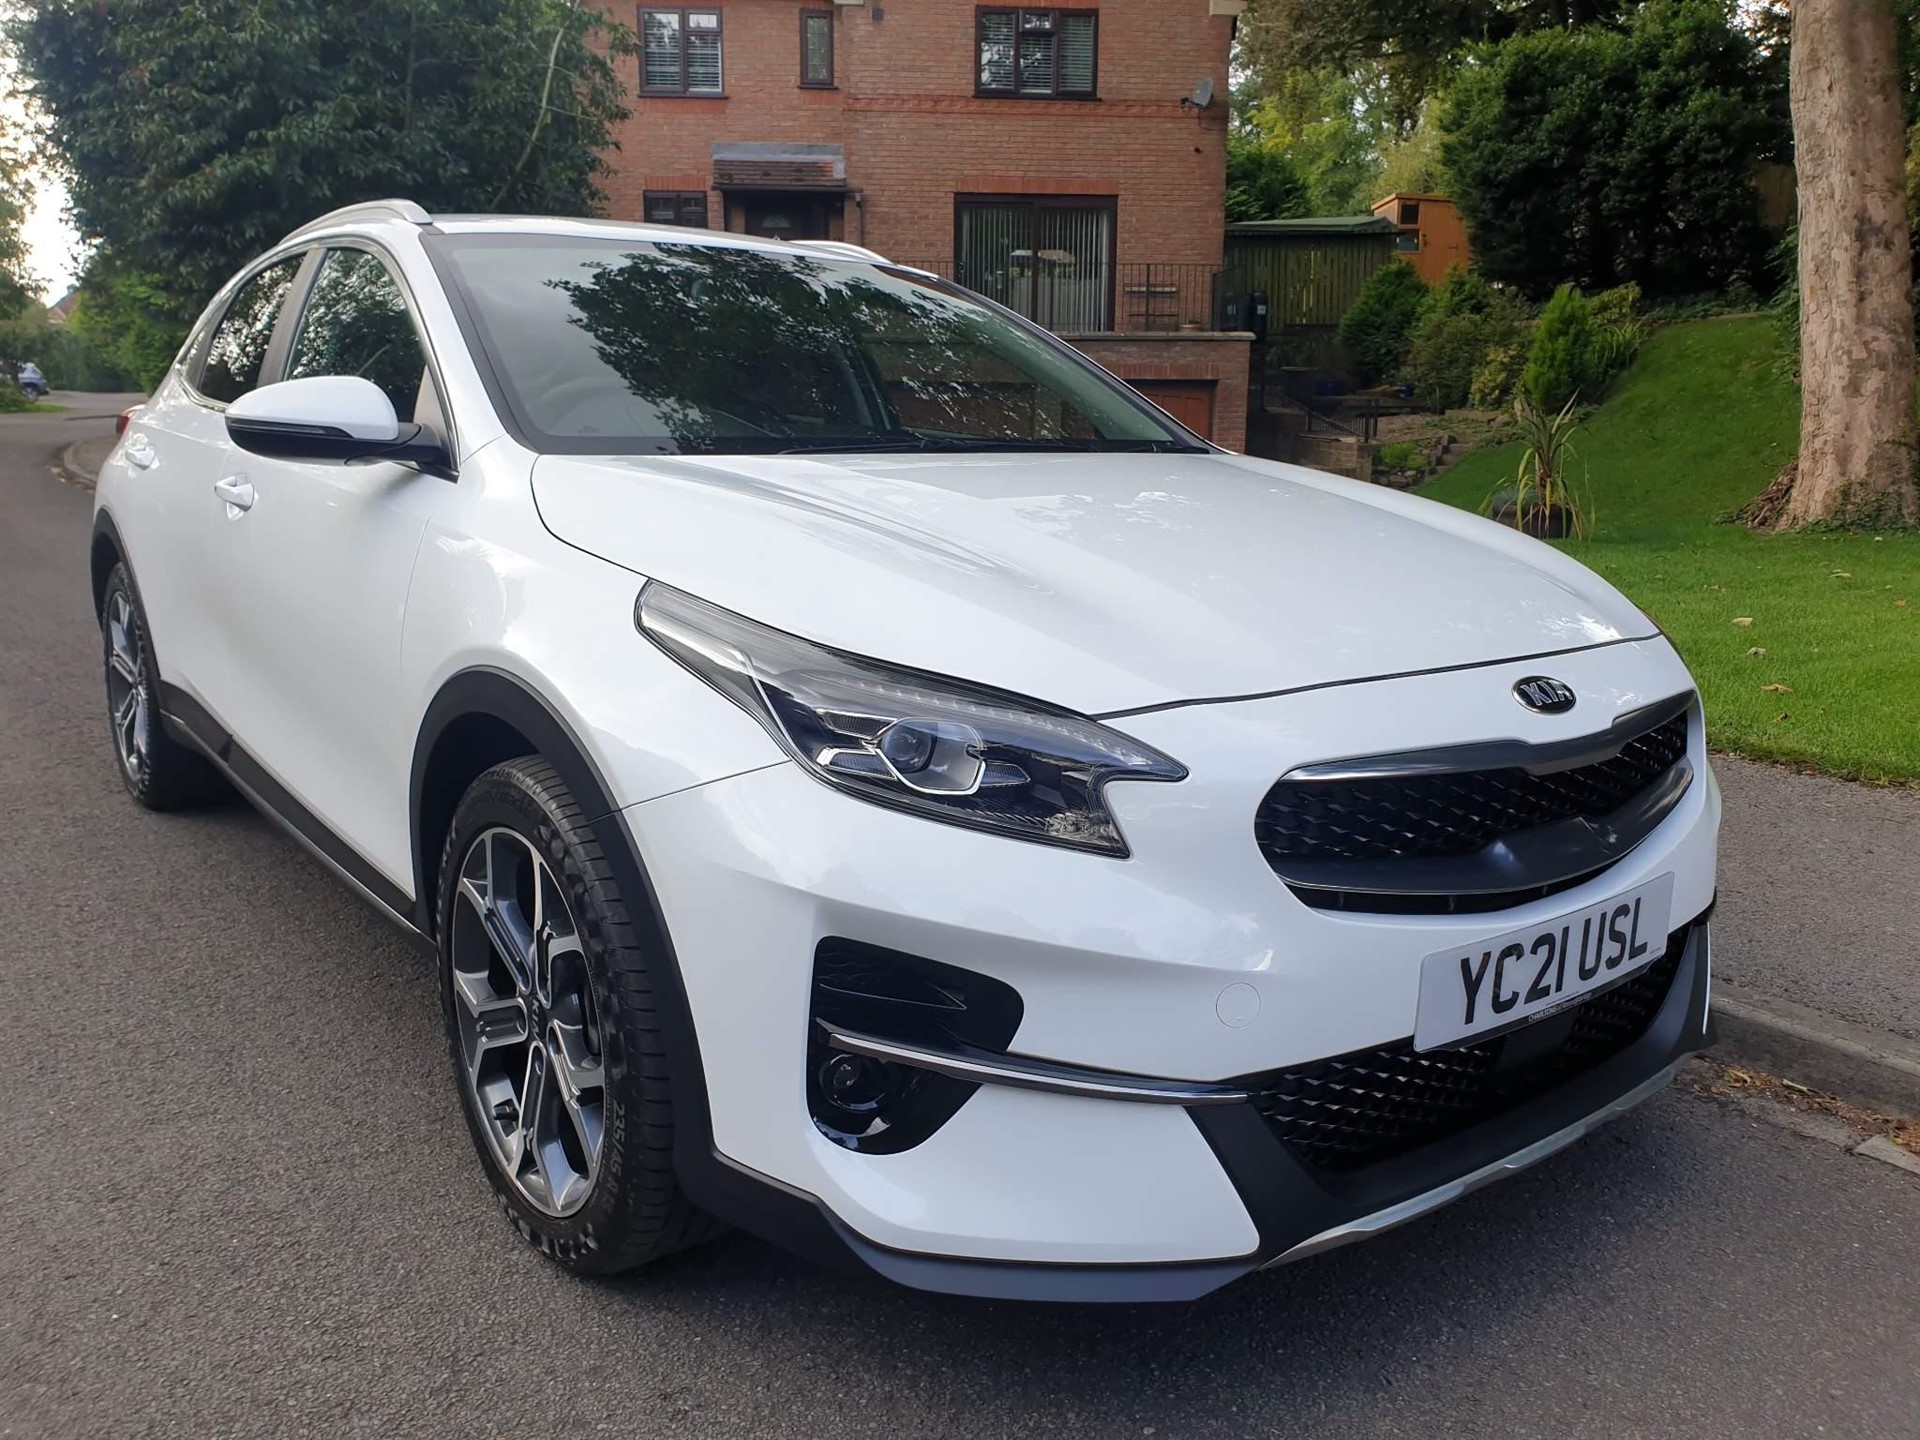 Used Kia XCeed for sale in York, North Yorkshire